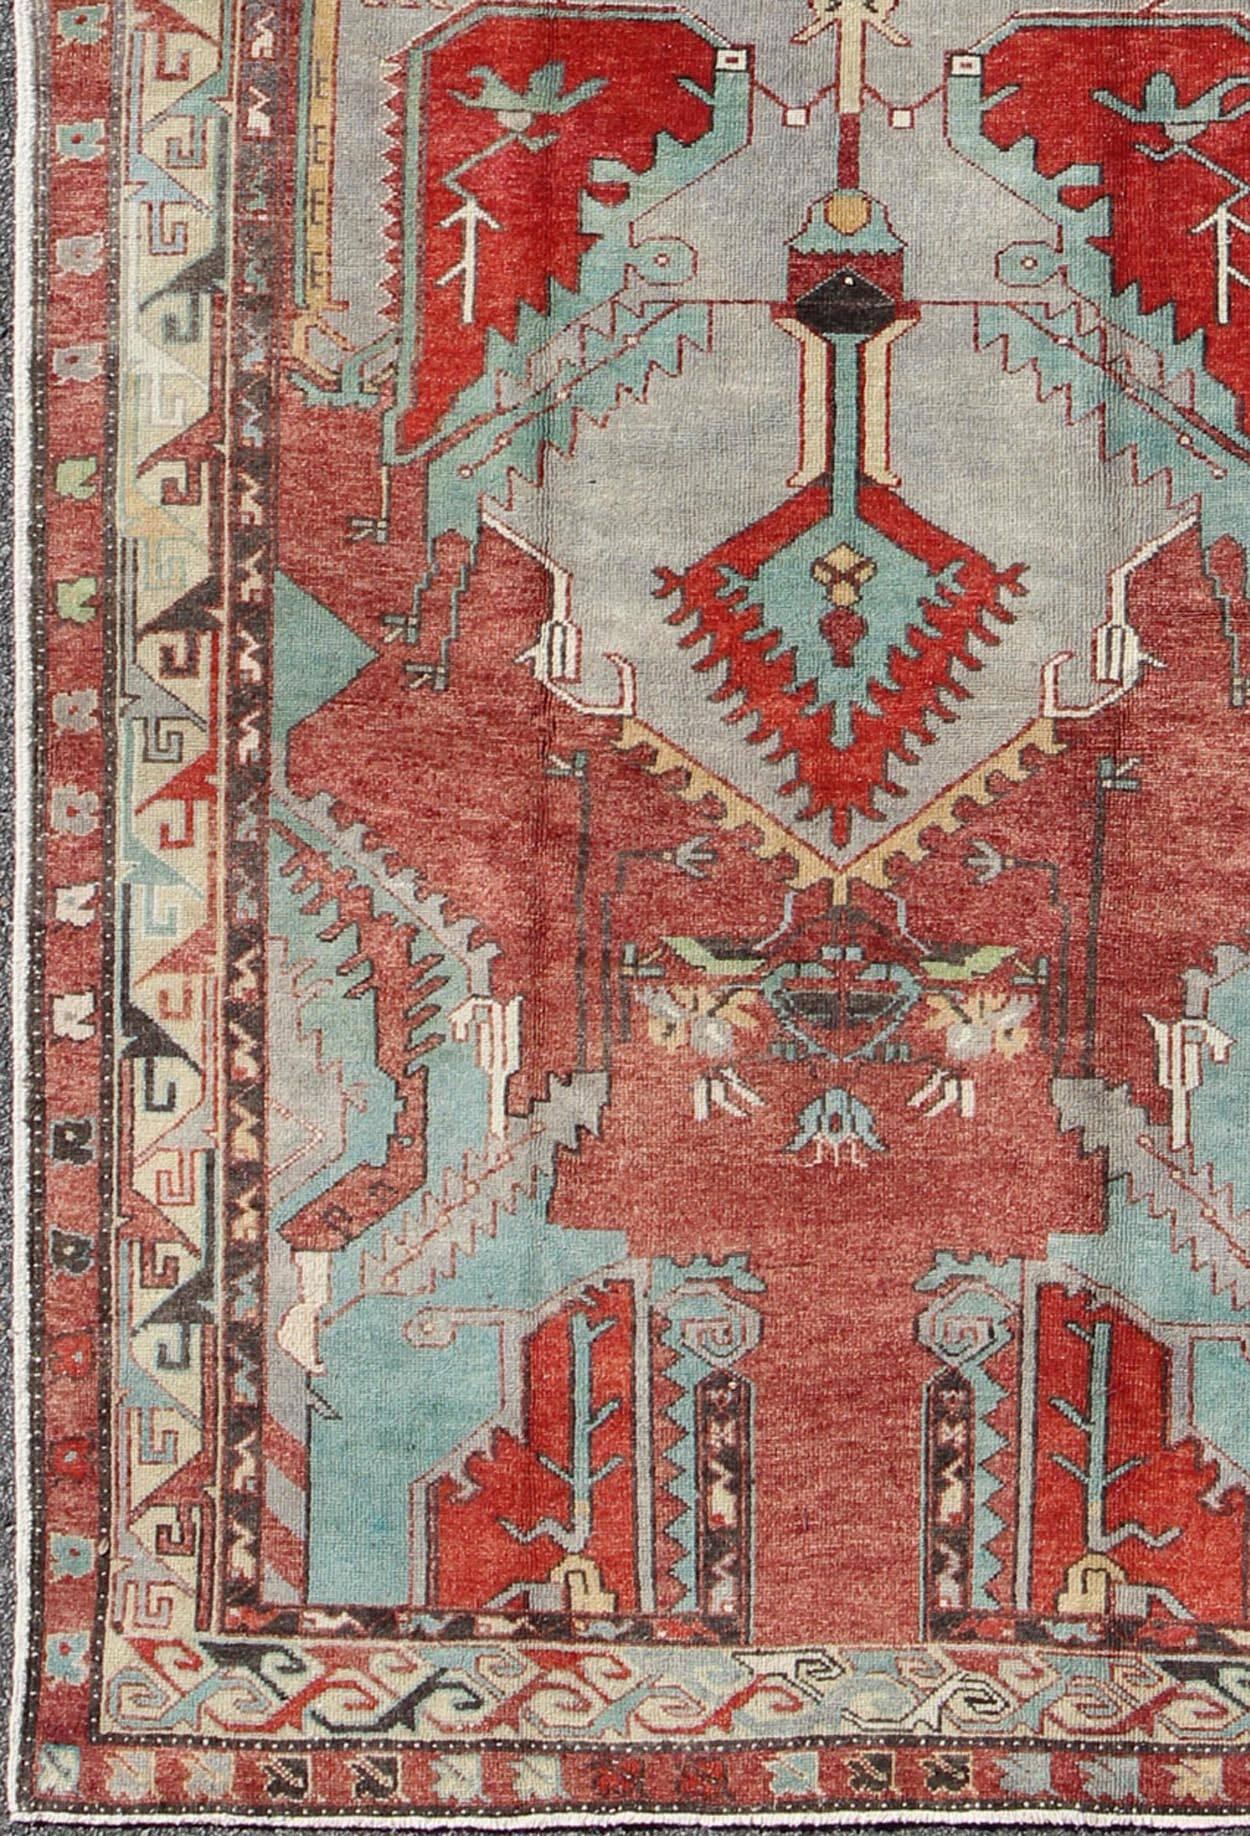 Vintage Turkish Oushak Gallery Rug with Geometric Design.
This Turkish Oushak gallery runner features subtle tones of Reds, taupe, beige, soft green, and light teal, which are highlighted by chocolate and mocha colors. The stylized center medallions